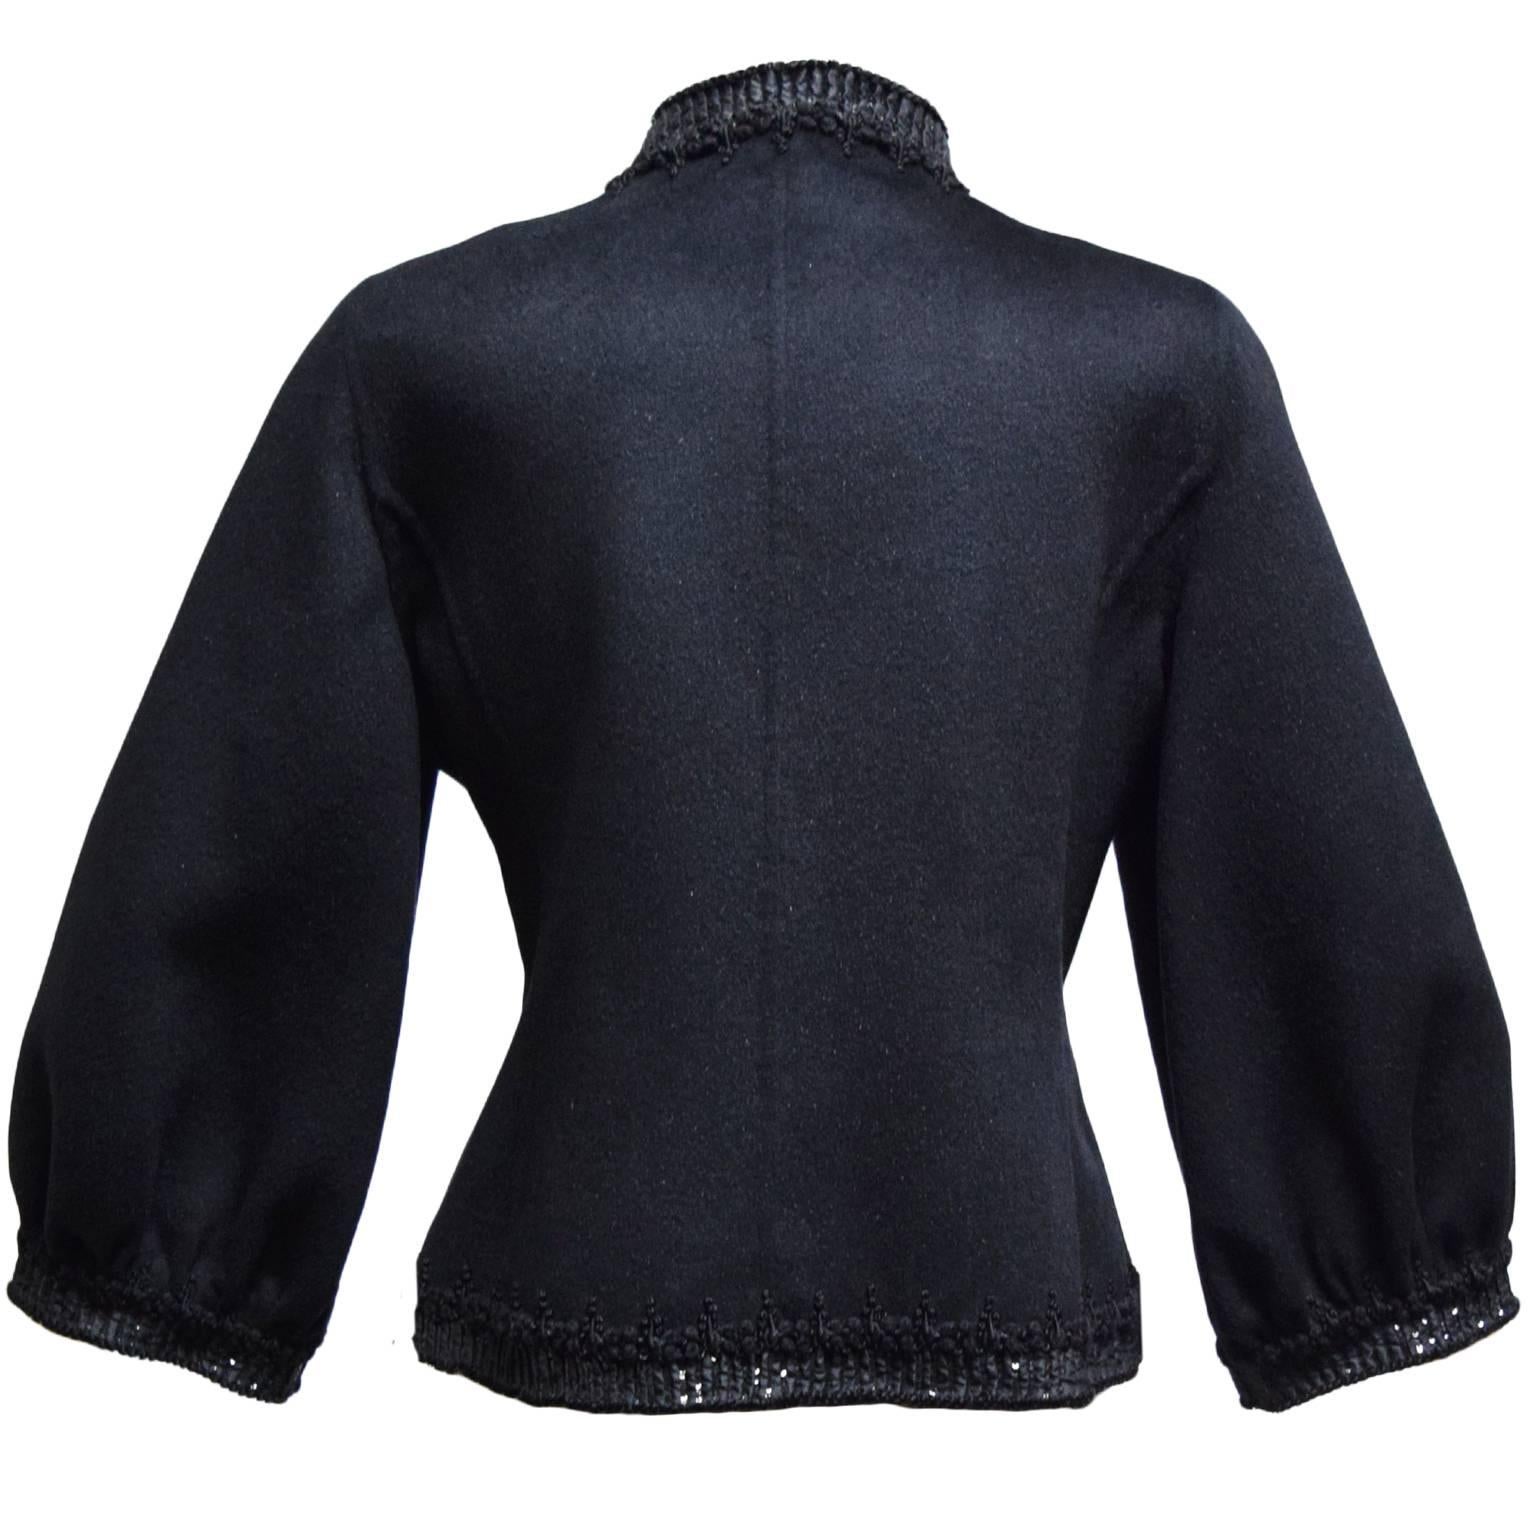 This Oscar de la Renta jacket is 100% wool with silk trapunto embroidery used as a elegant border. It is double faced with a slight mocked neck and bishop sleeves. 